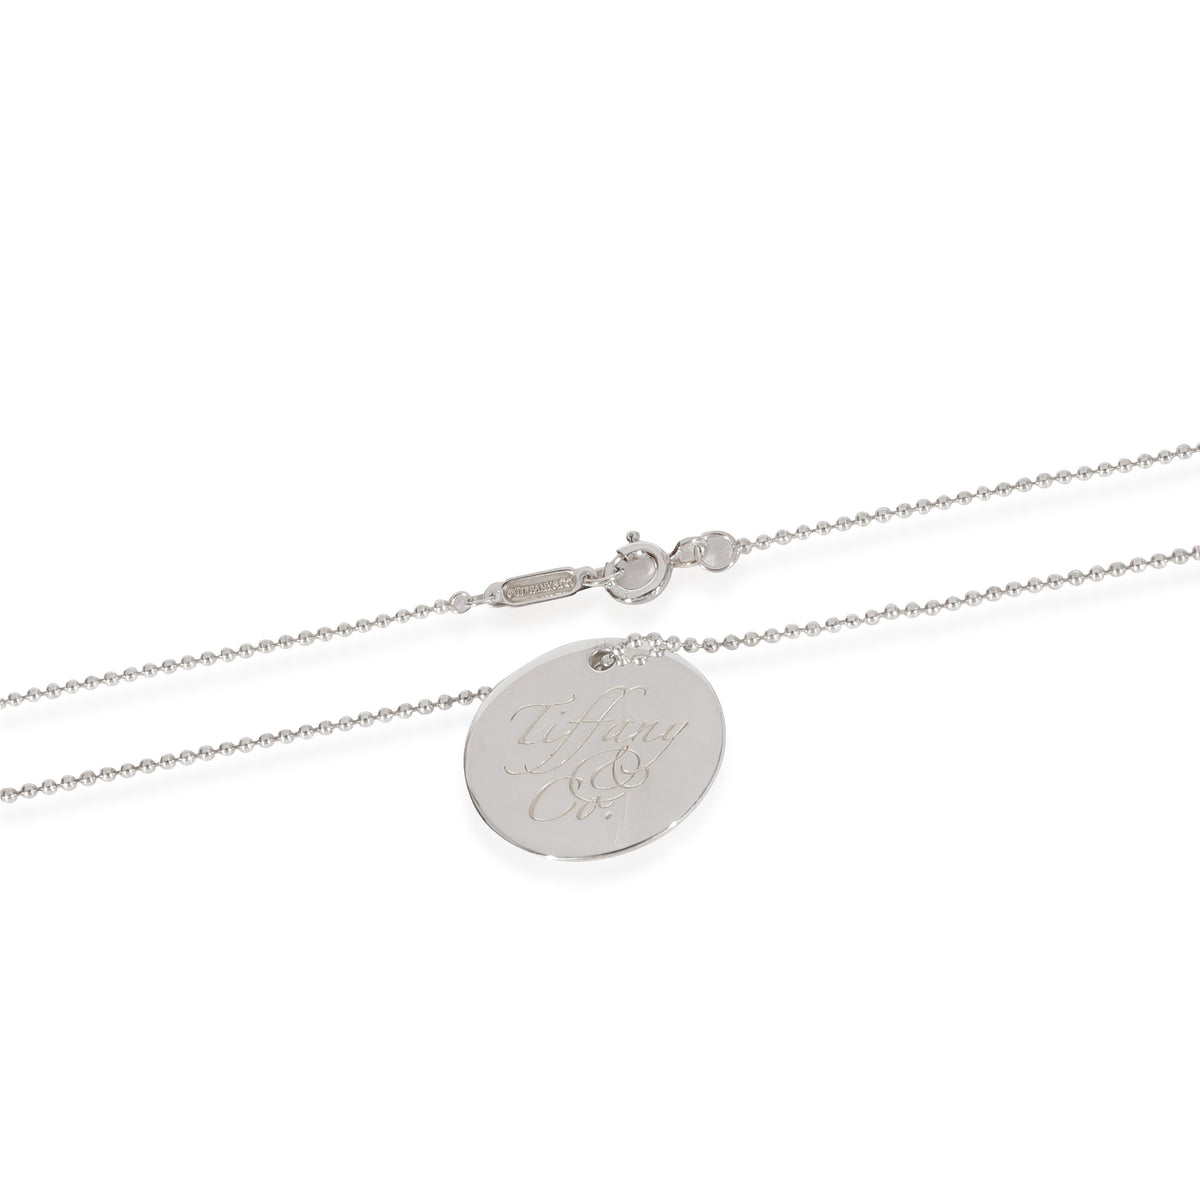 Tiffany & Co. Circle Pendant On Bead Chain in Sterling Silver